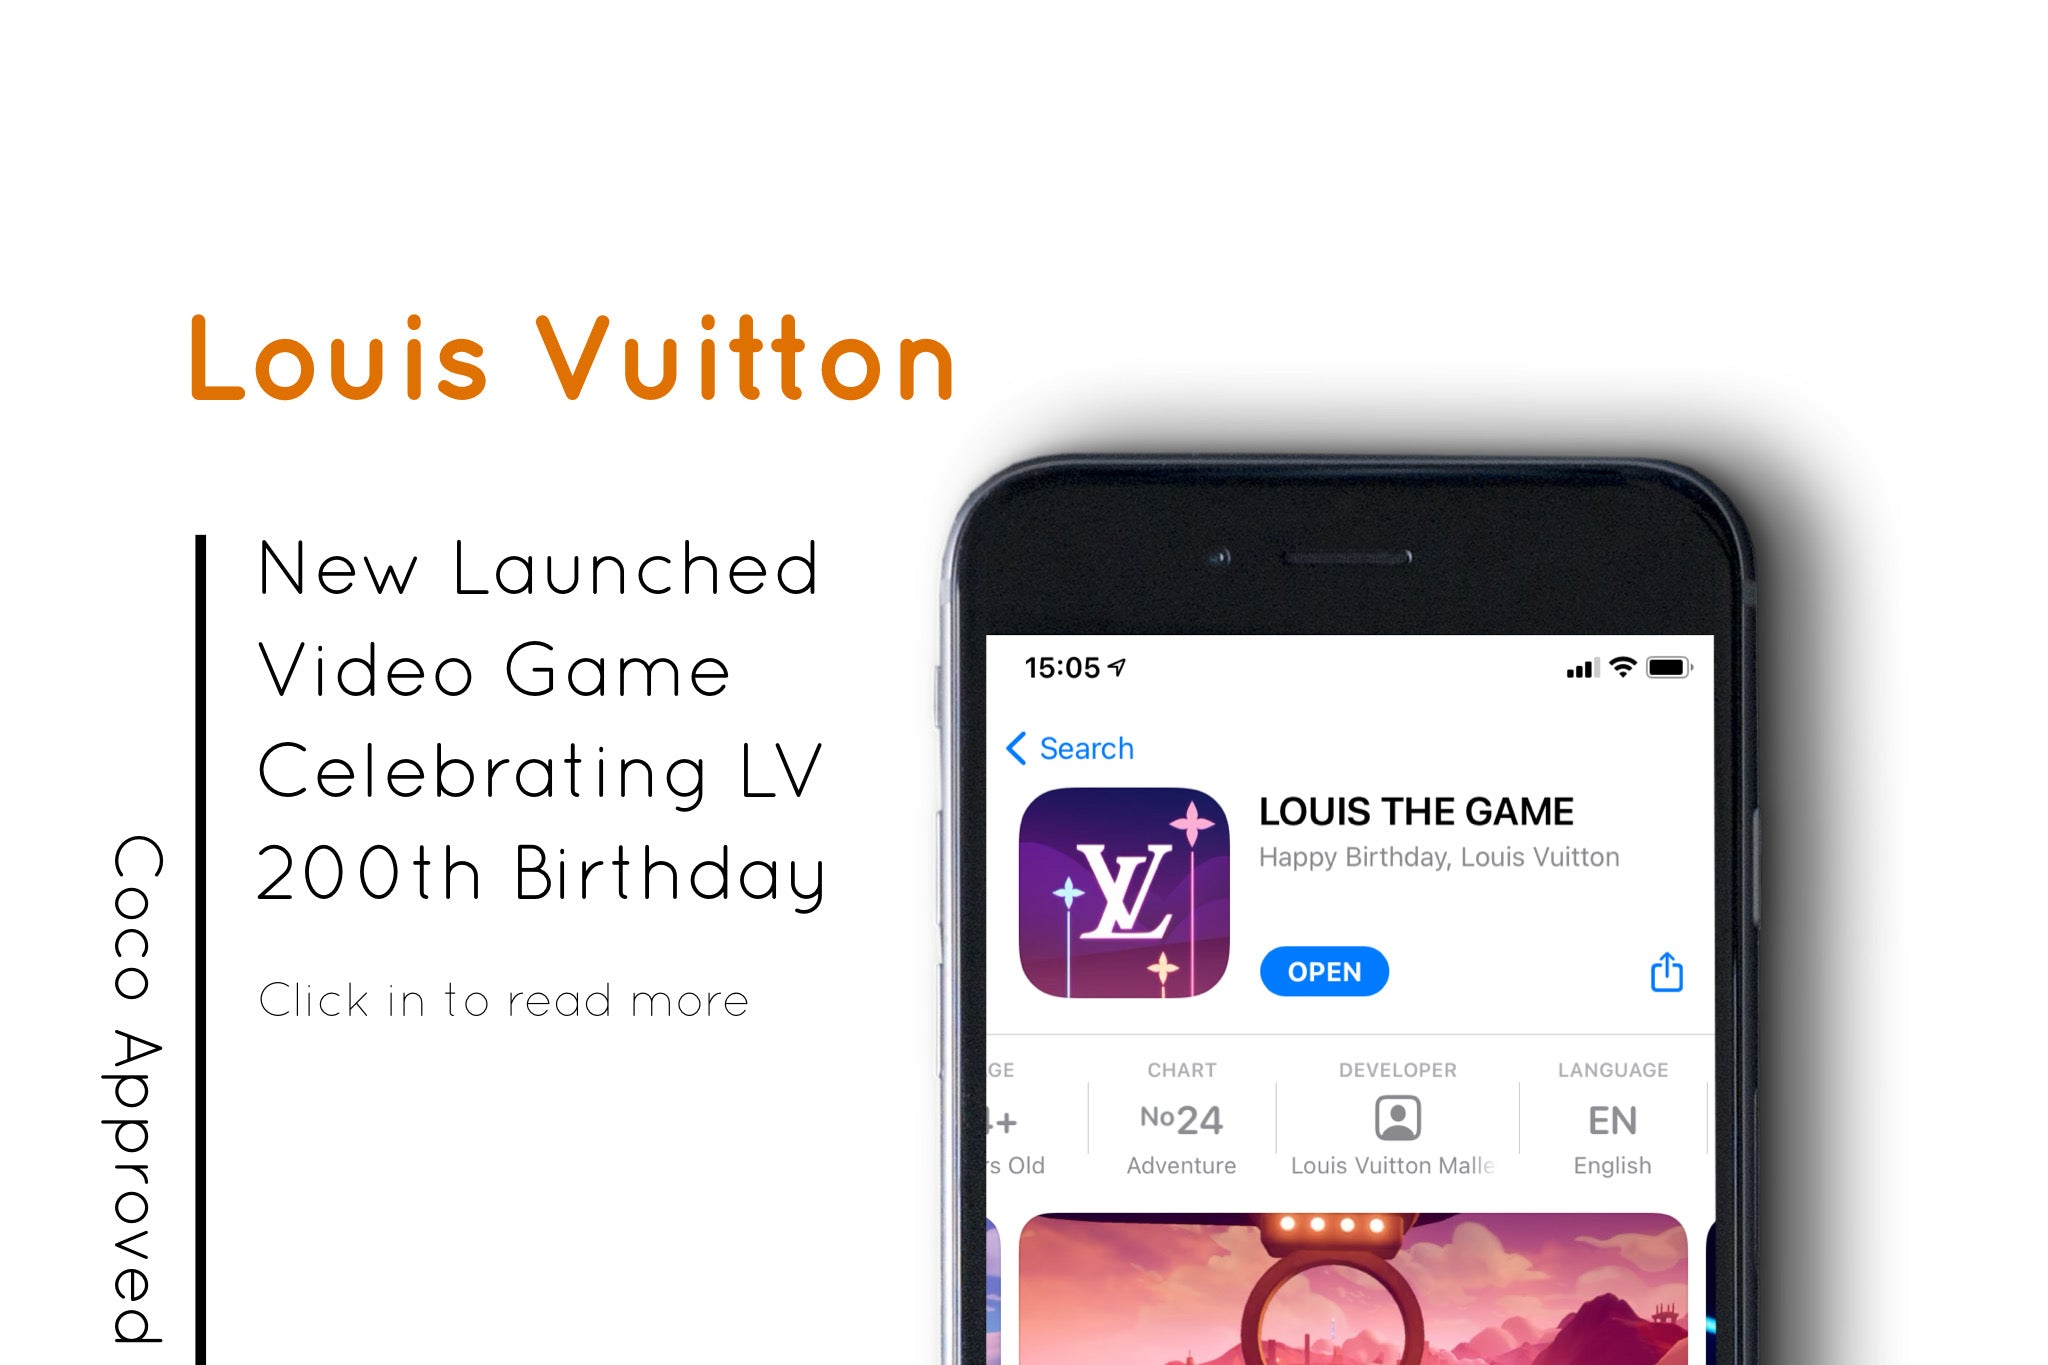 To celebrate its 200th anniversary, Louis Vuitton launched a game